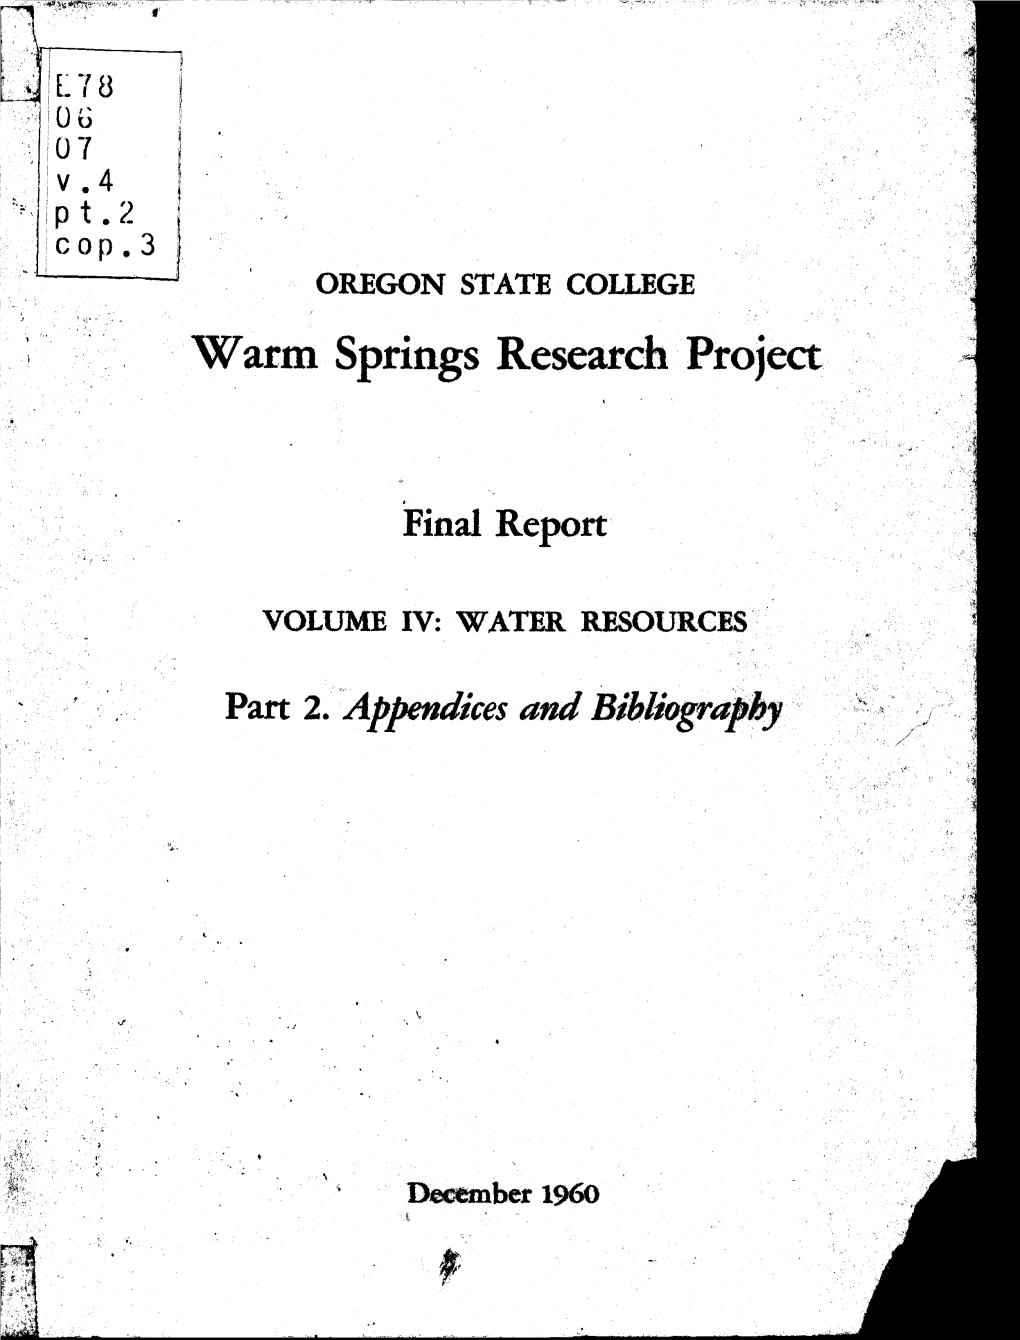 Warm Springs Research Project